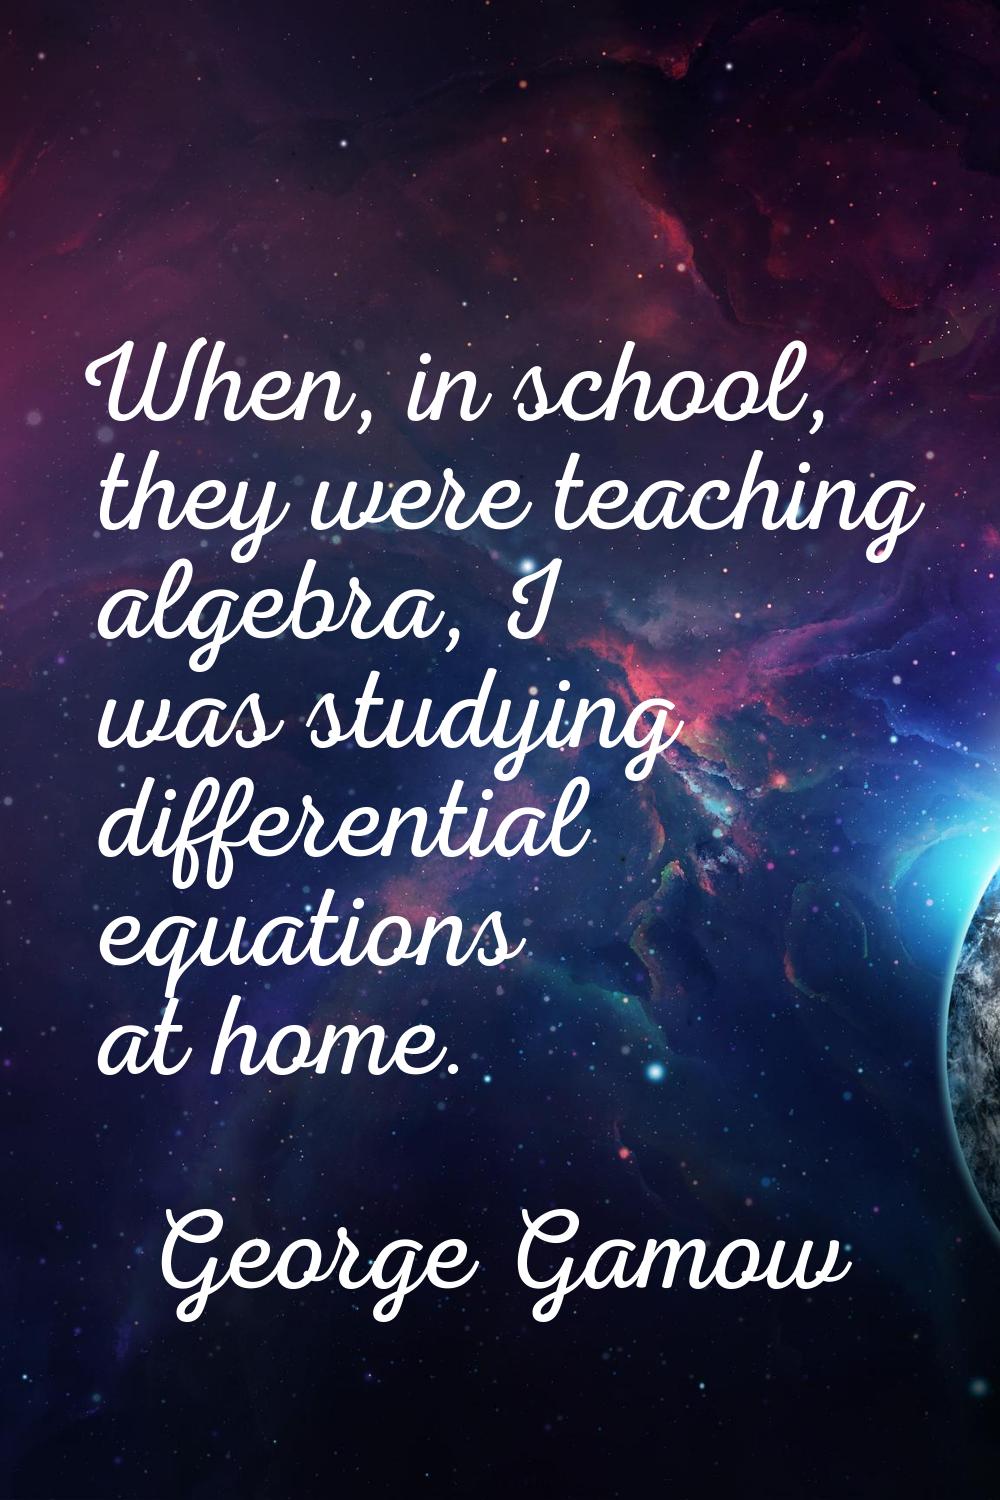 When, in school, they were teaching algebra, I was studying differential equations at home.